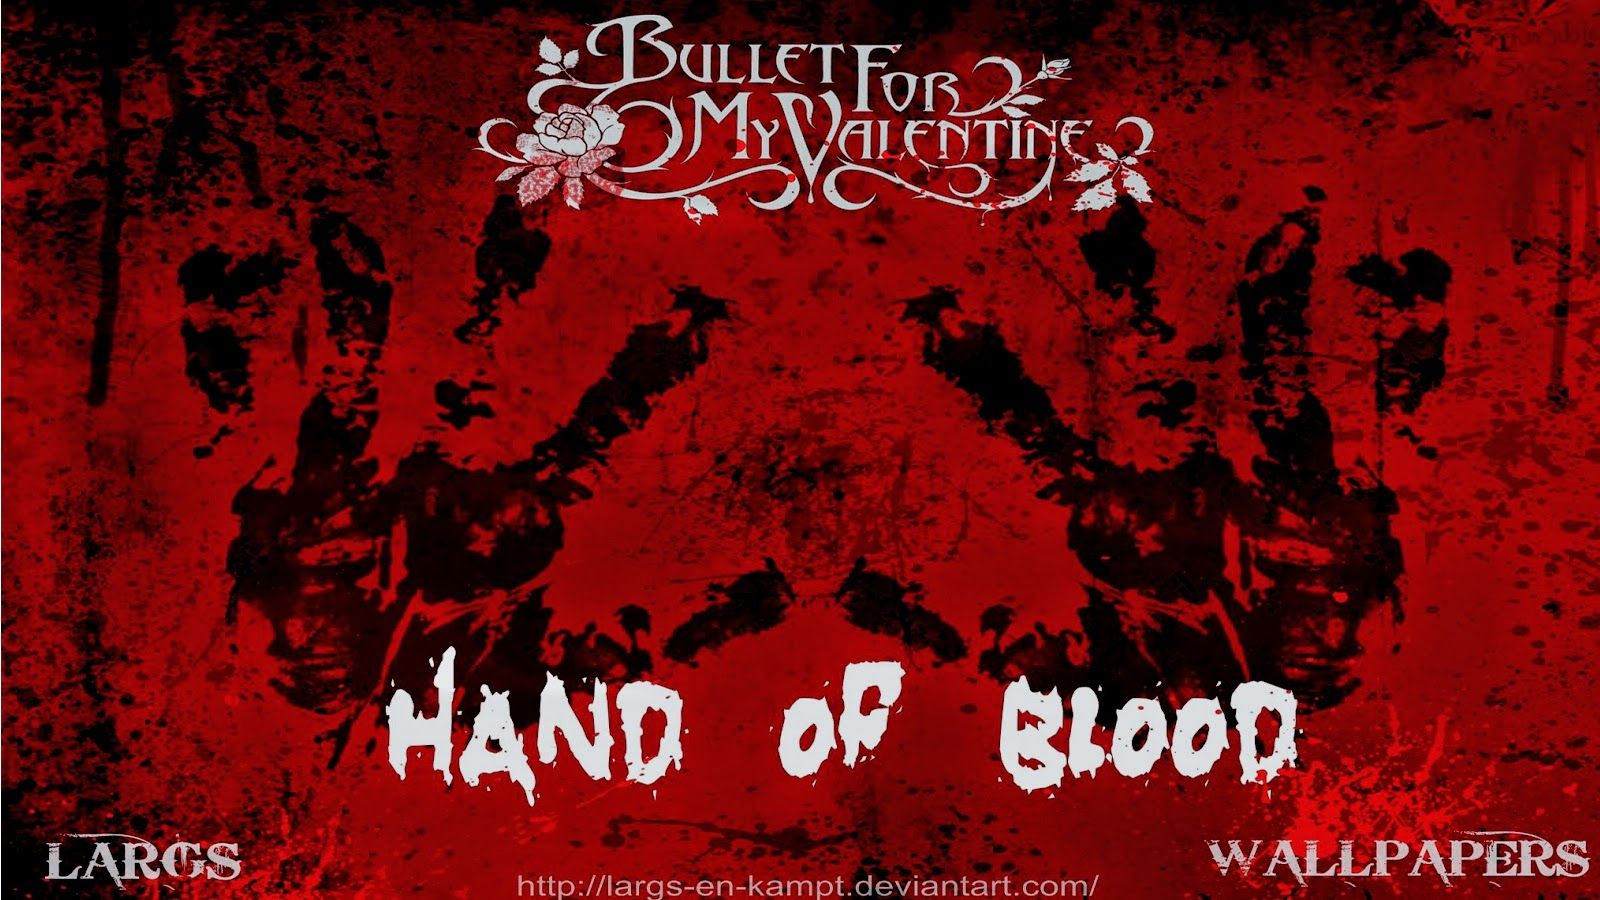 Largs Wallpaper: 29º BULLET FOR MY VALENTINE WALLPAPER OF BLOOD